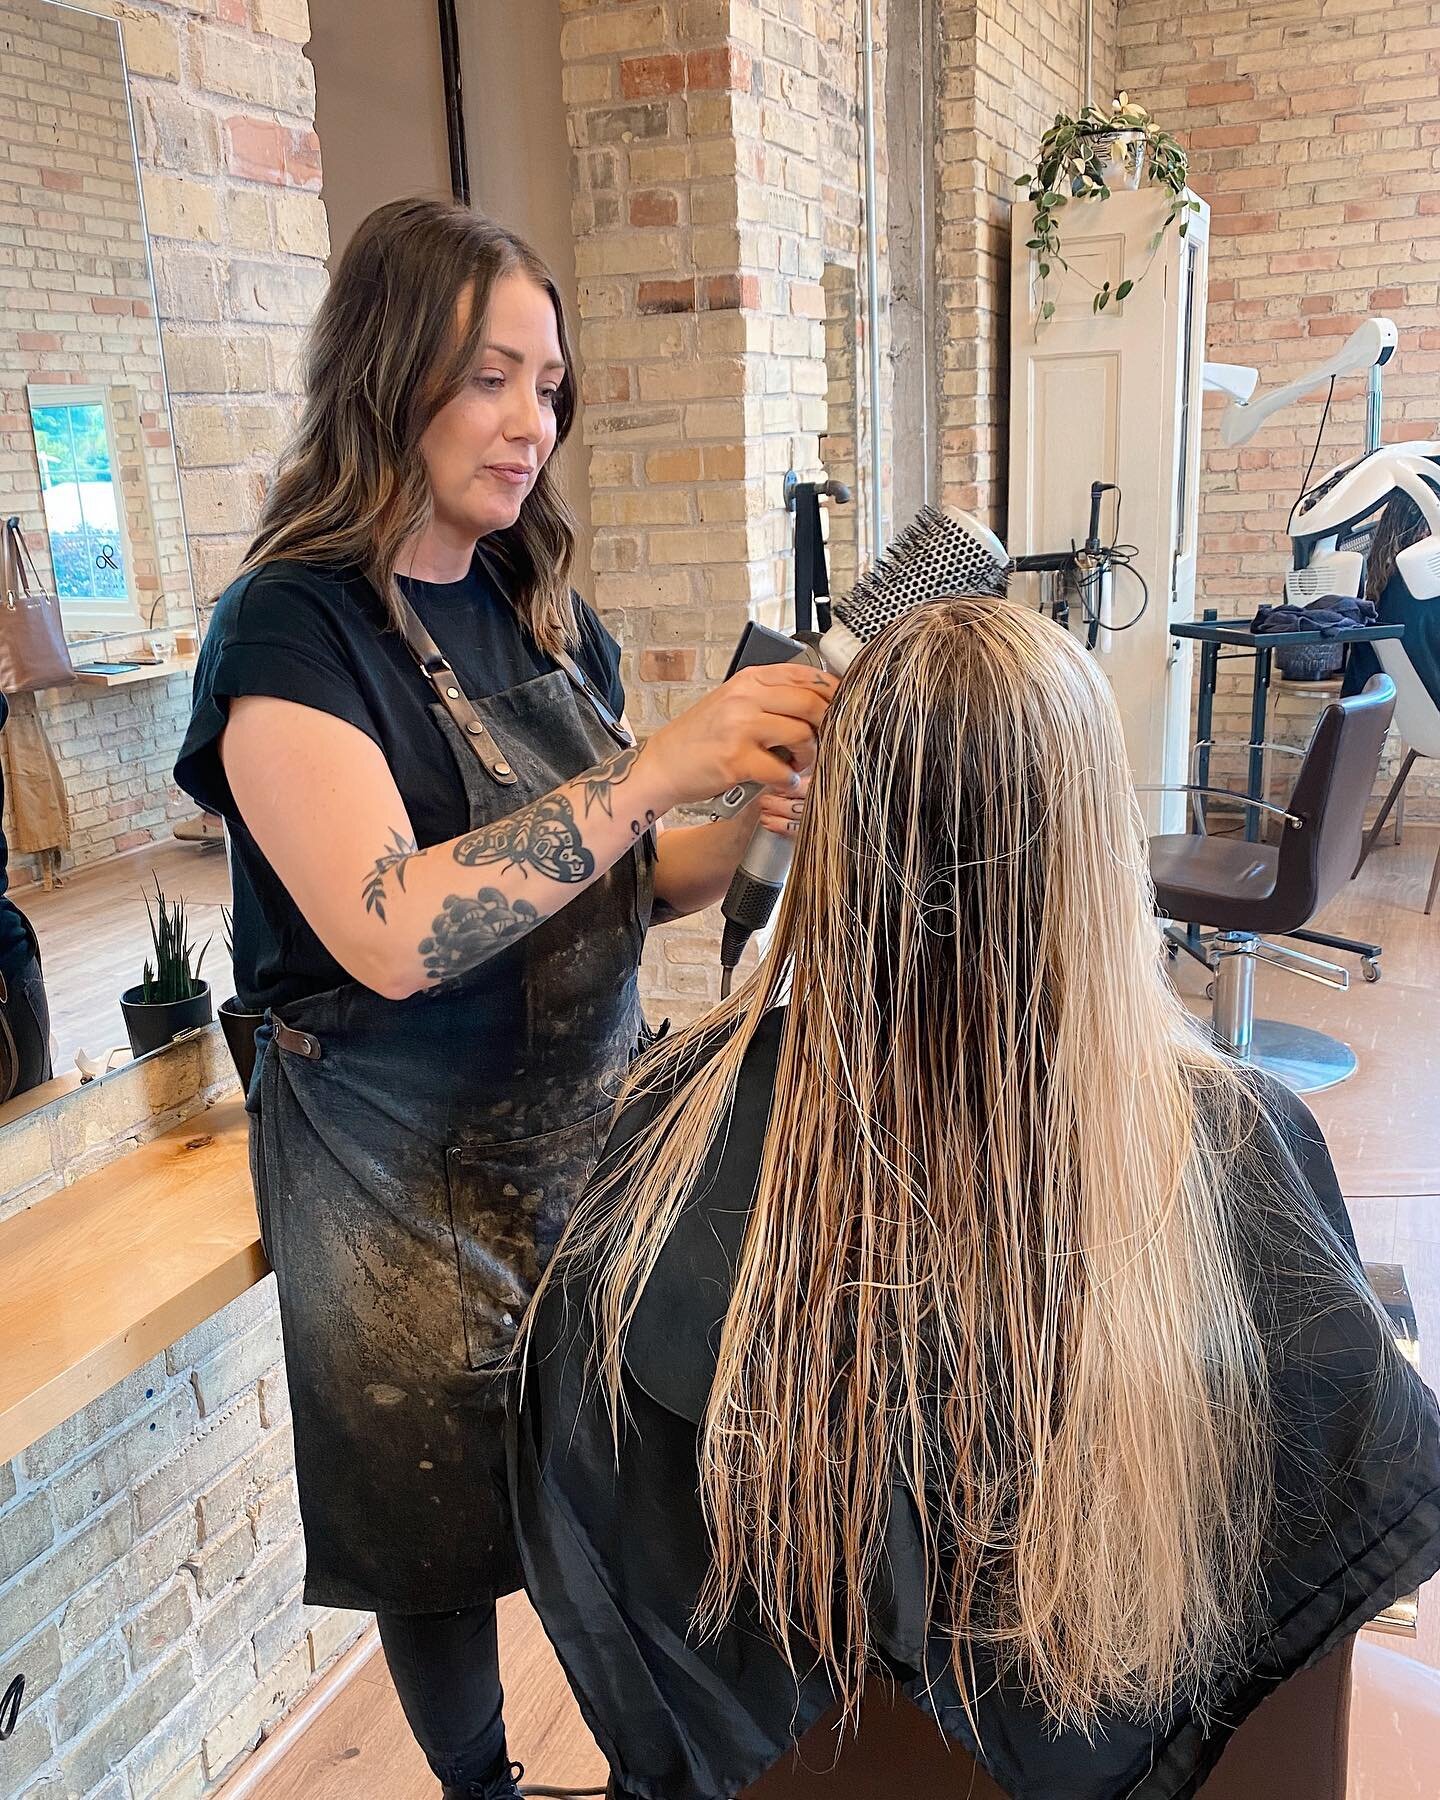 It&rsquo;s Been Busy 🐝  @bethavarali @peyton.cosmetology || You would think it was a FRIDAY ✨
.
.
#busysalon 🤍 #downtowntc #tclove #bellababe #bellaamicisalon #traversecity #helloclients